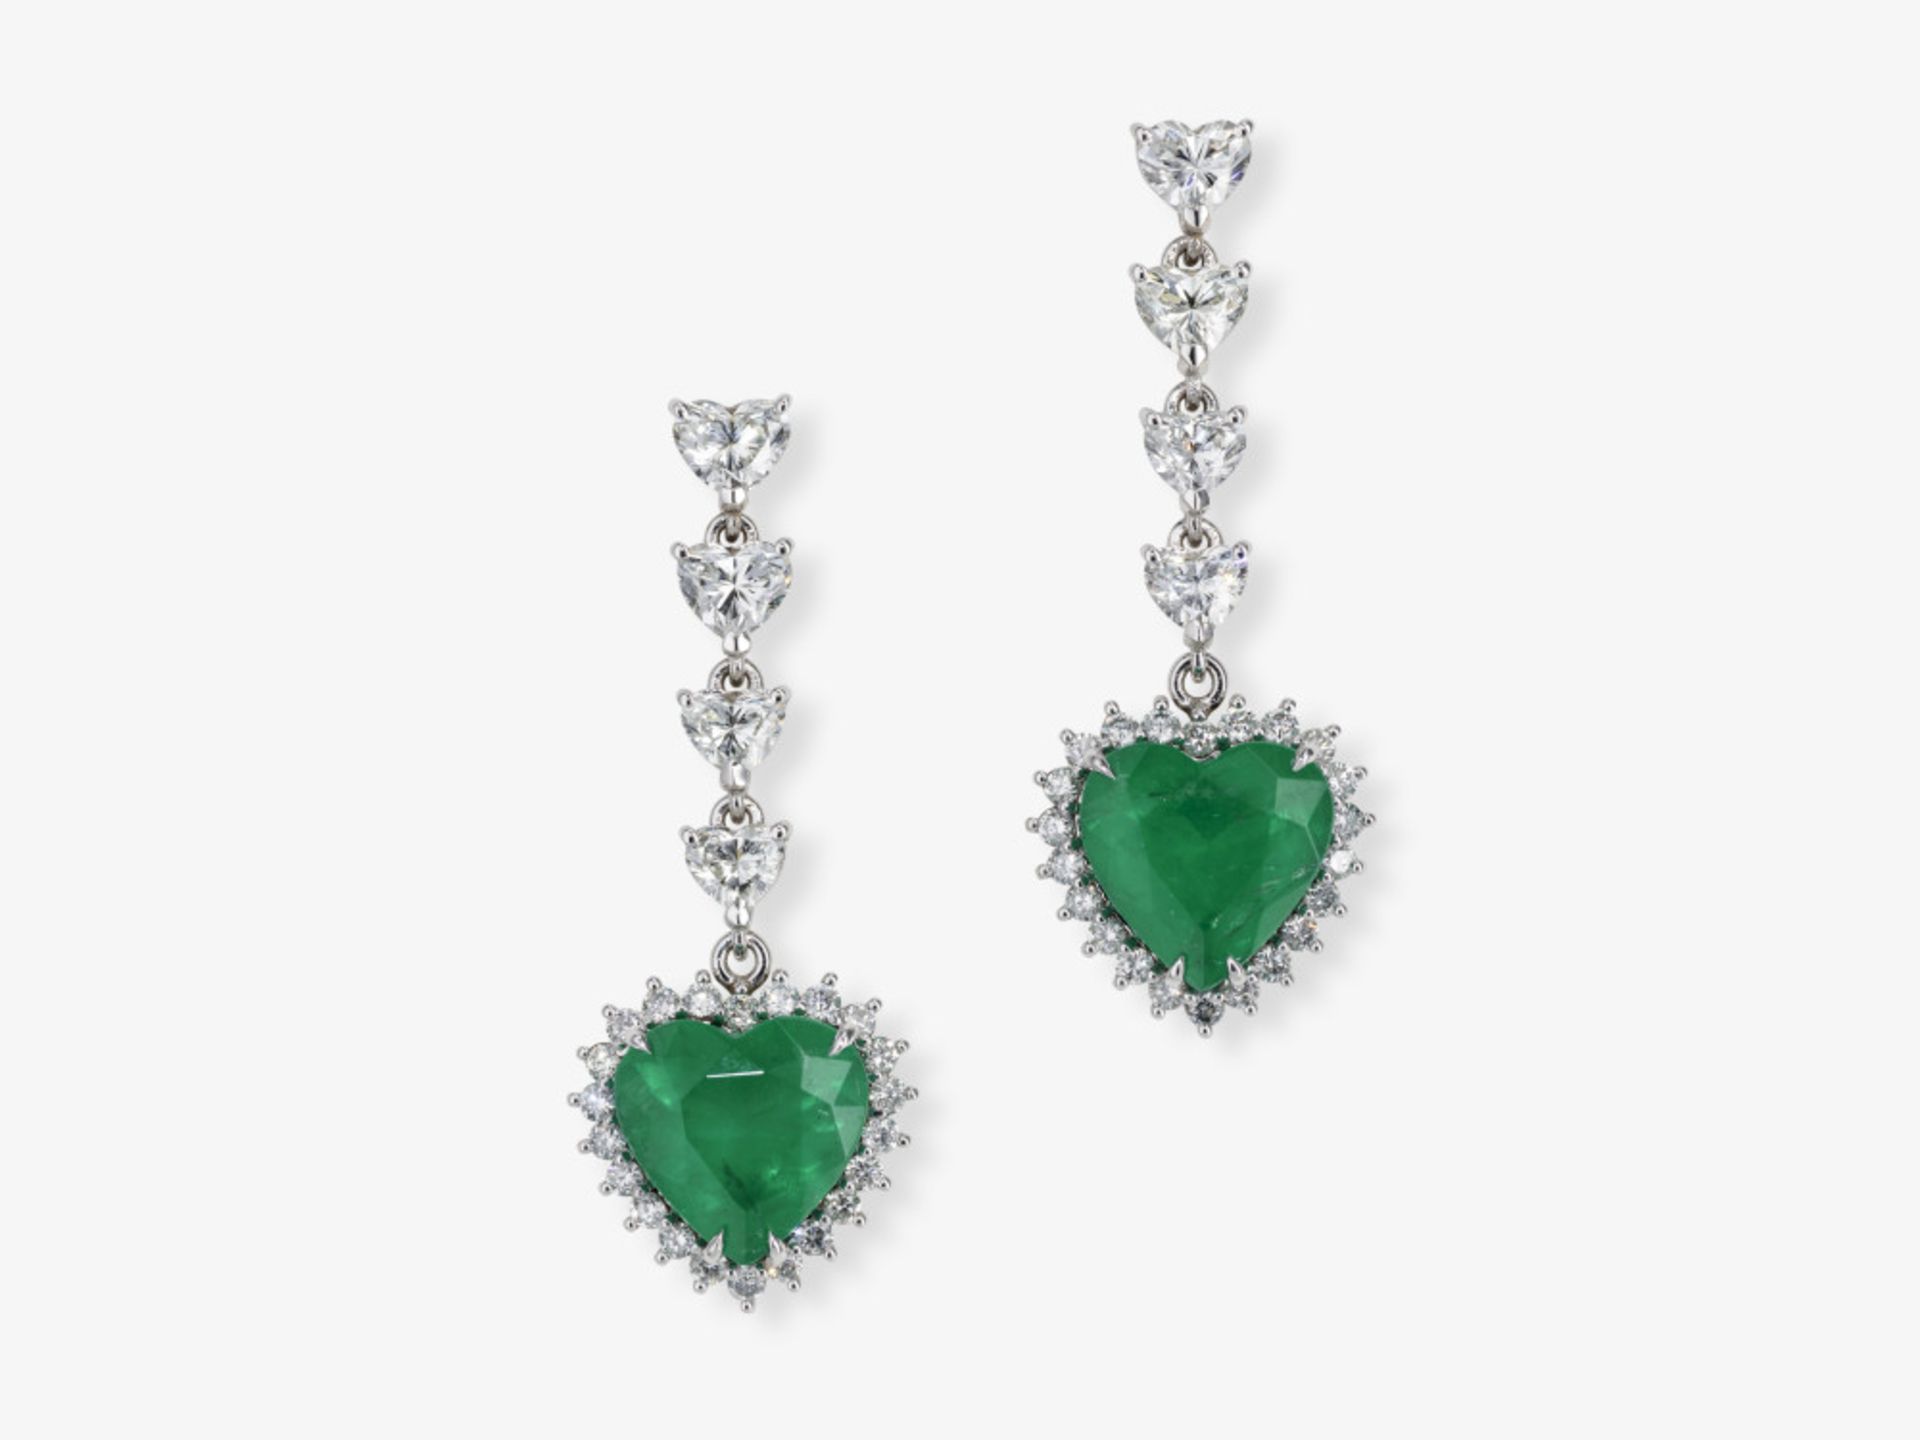 A pair of drop earrings with emeralds and brilliant-cut diamonds